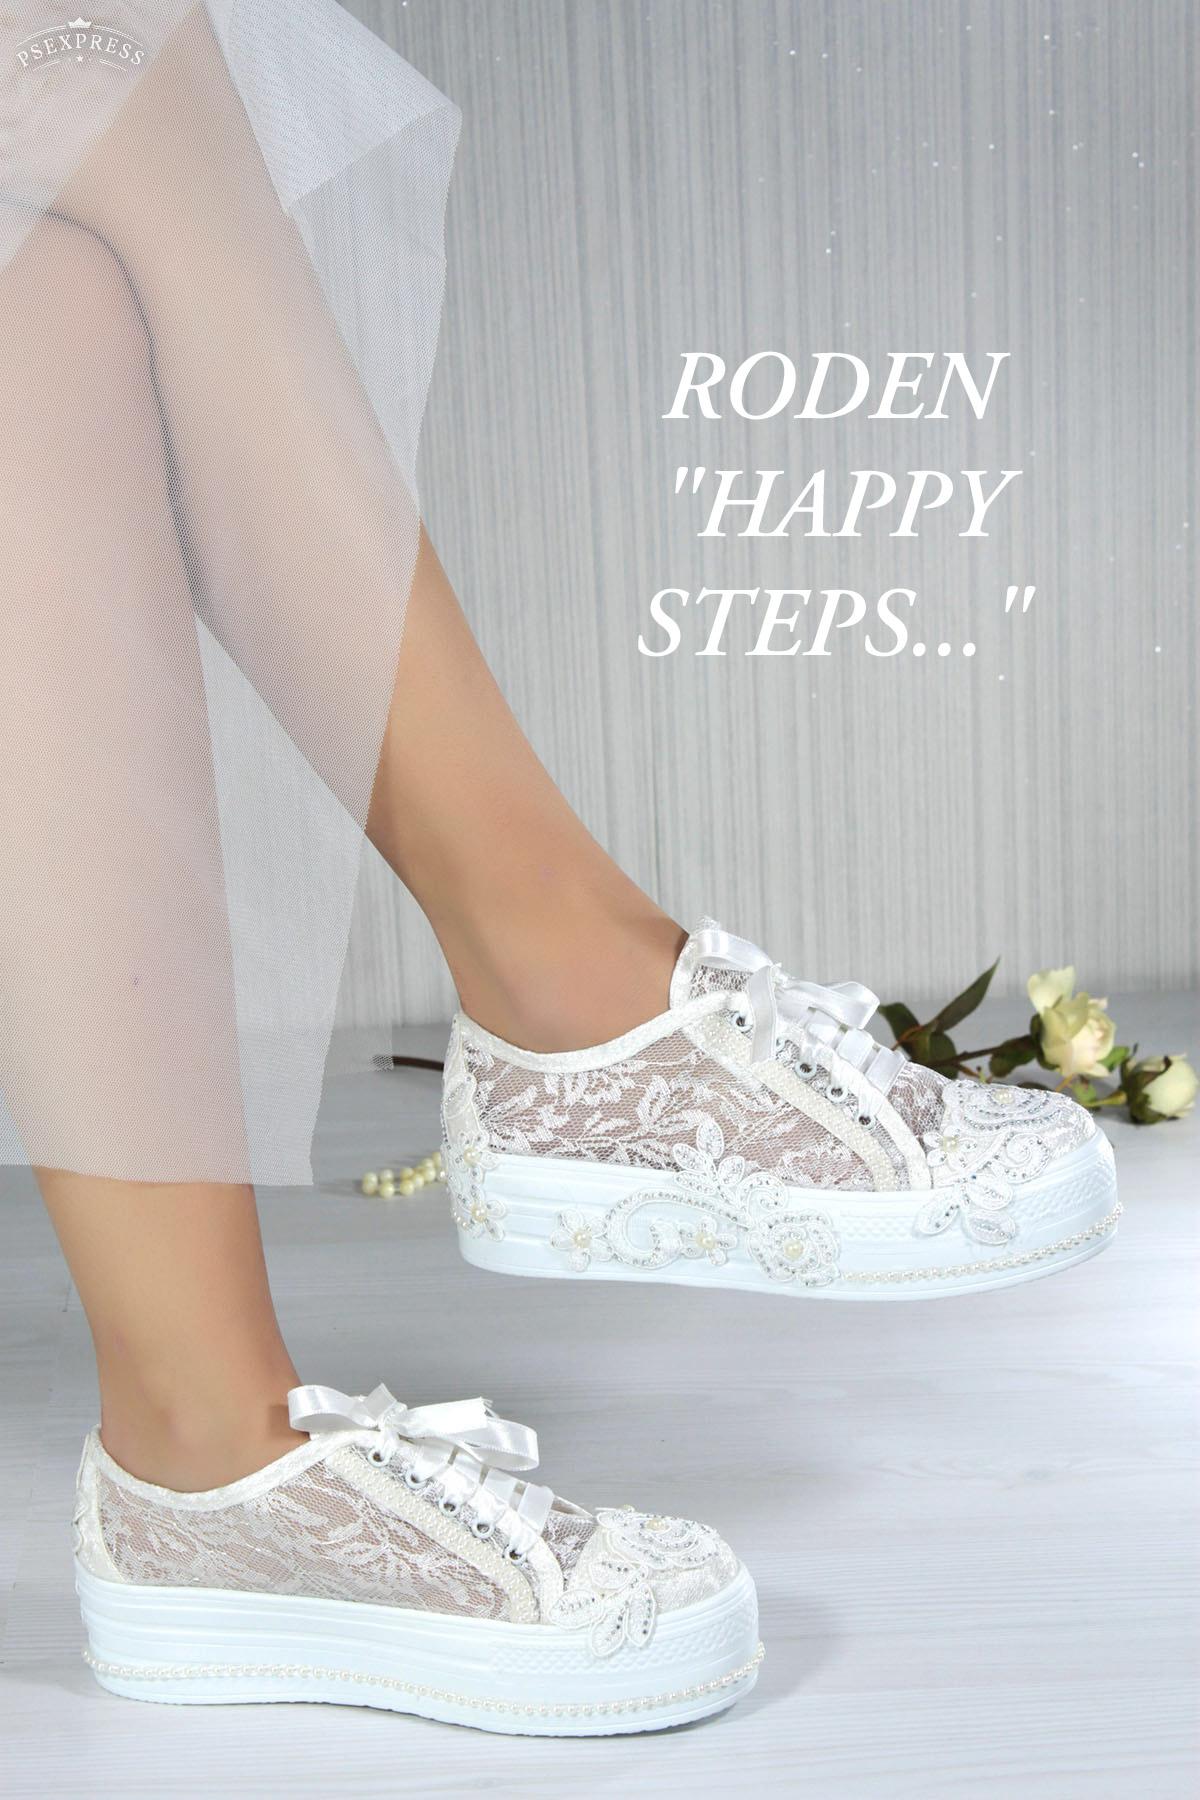 RODEN SHOES NİCOLA